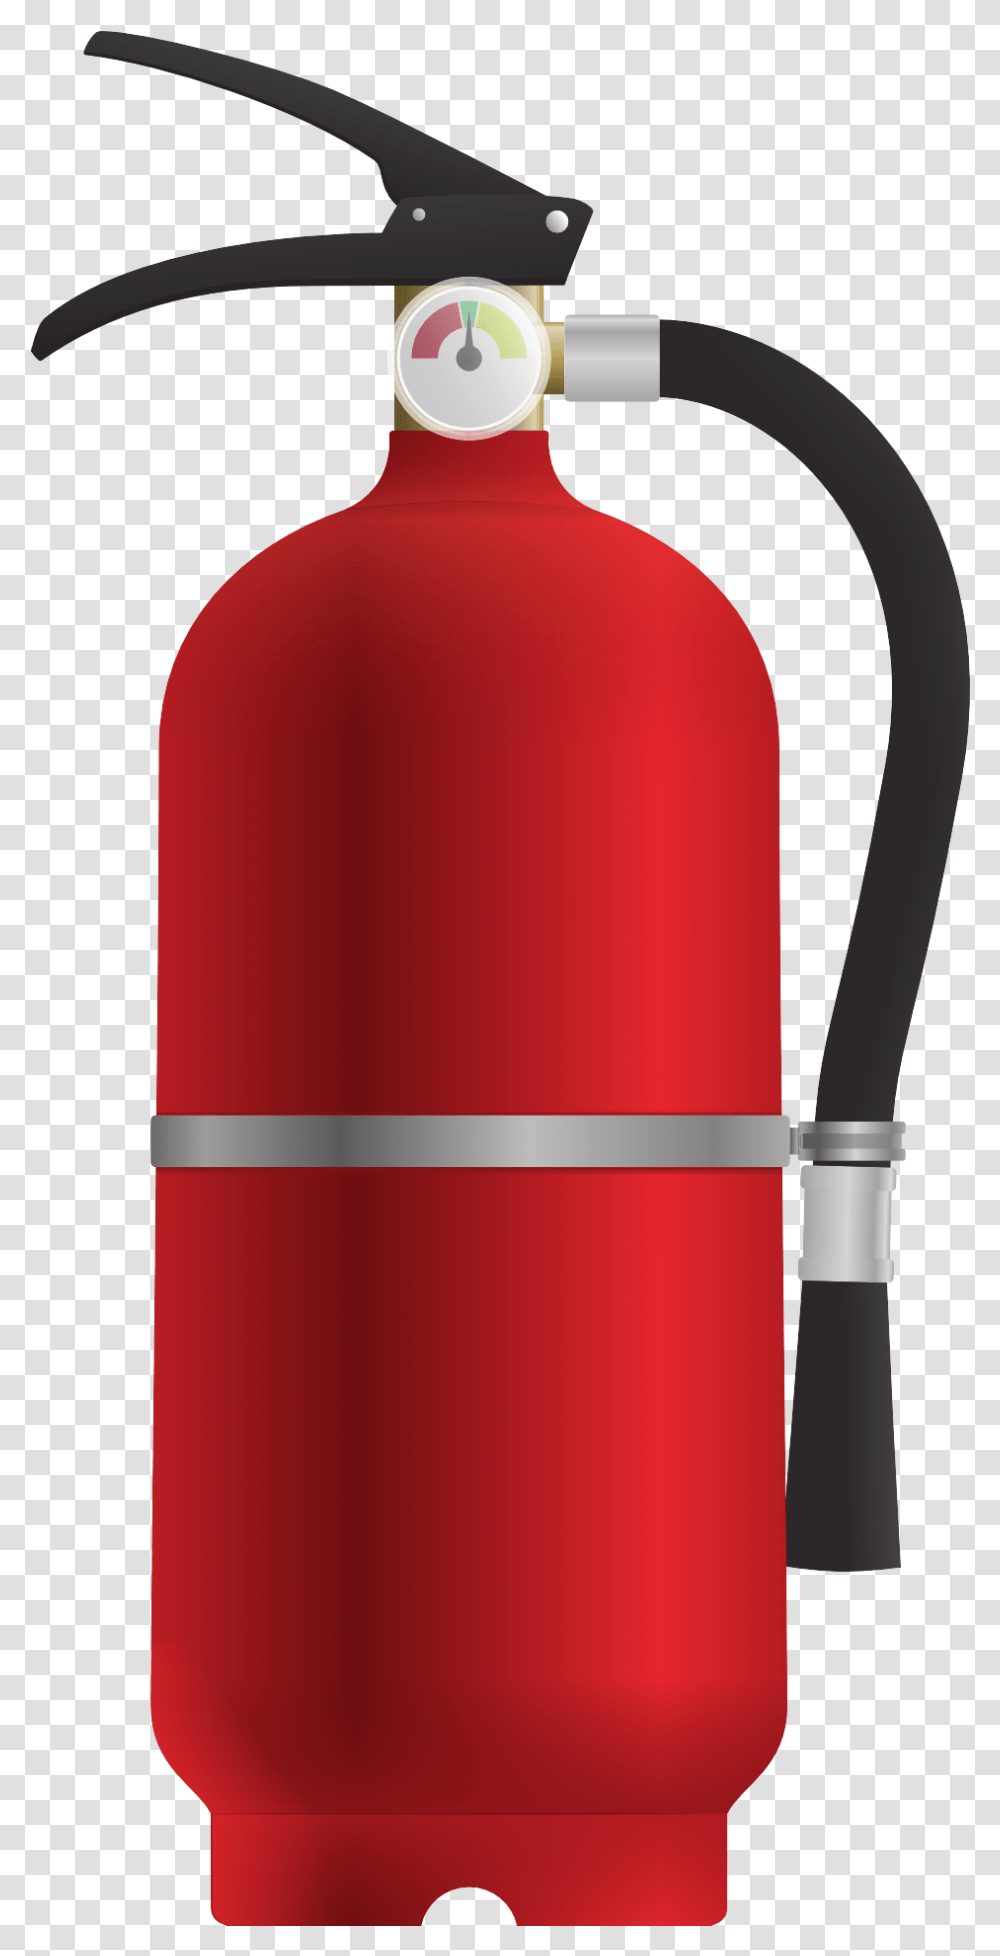 Fire Extinguisher Vector Image Fire Extinguisher Vector, Weapon, Weaponry, Bomb, Gas Pump Transparent Png